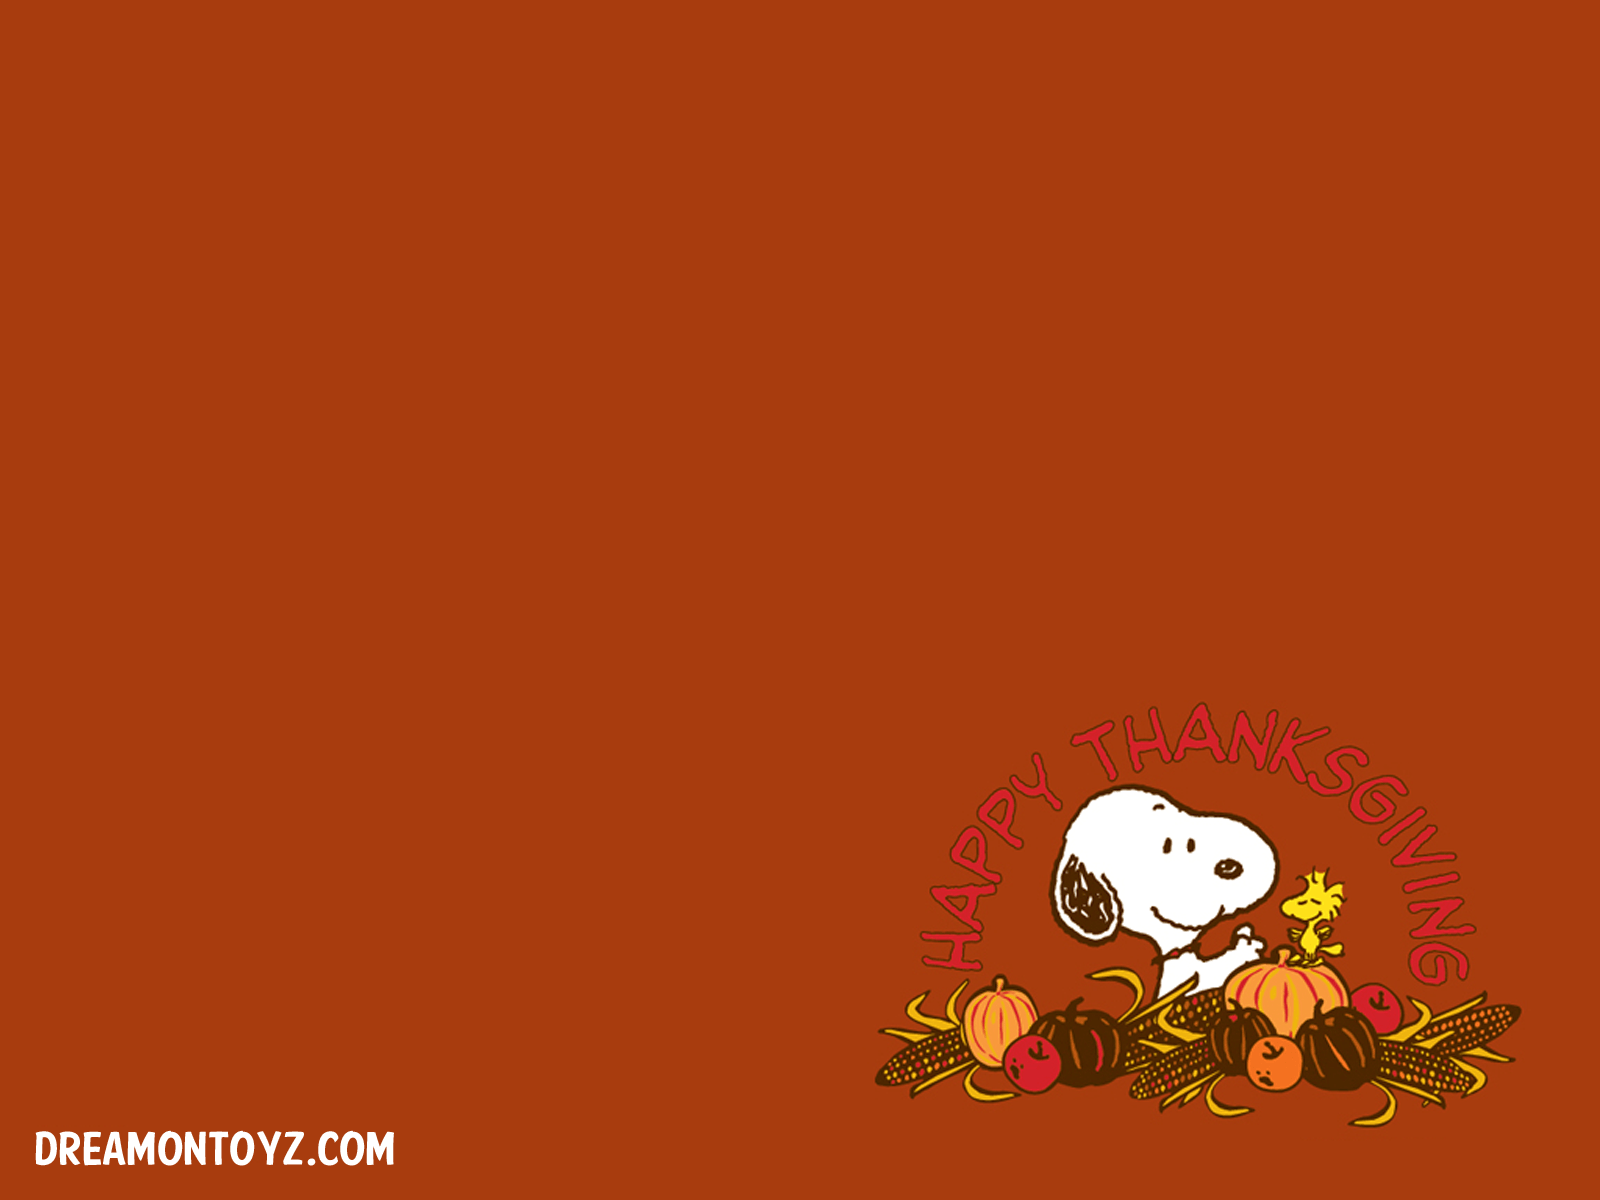 Snoopy Thanksgiving. Peanuts wallpaper, Snoopy wallpaper, Thanksgiving wallpaper